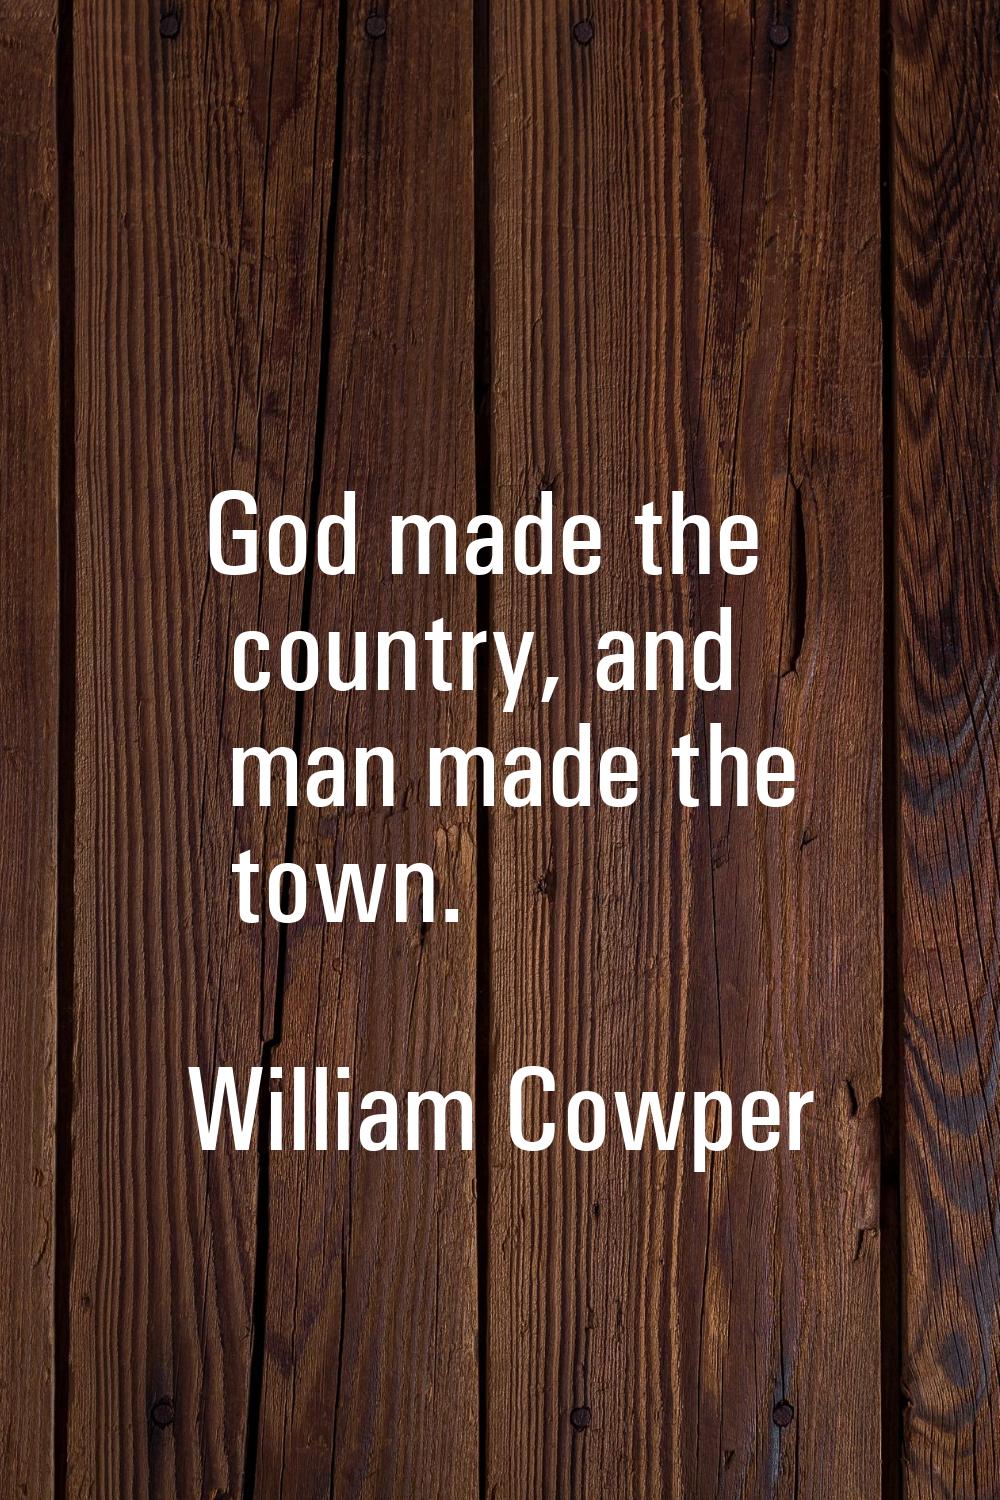 God made the country, and man made the town.